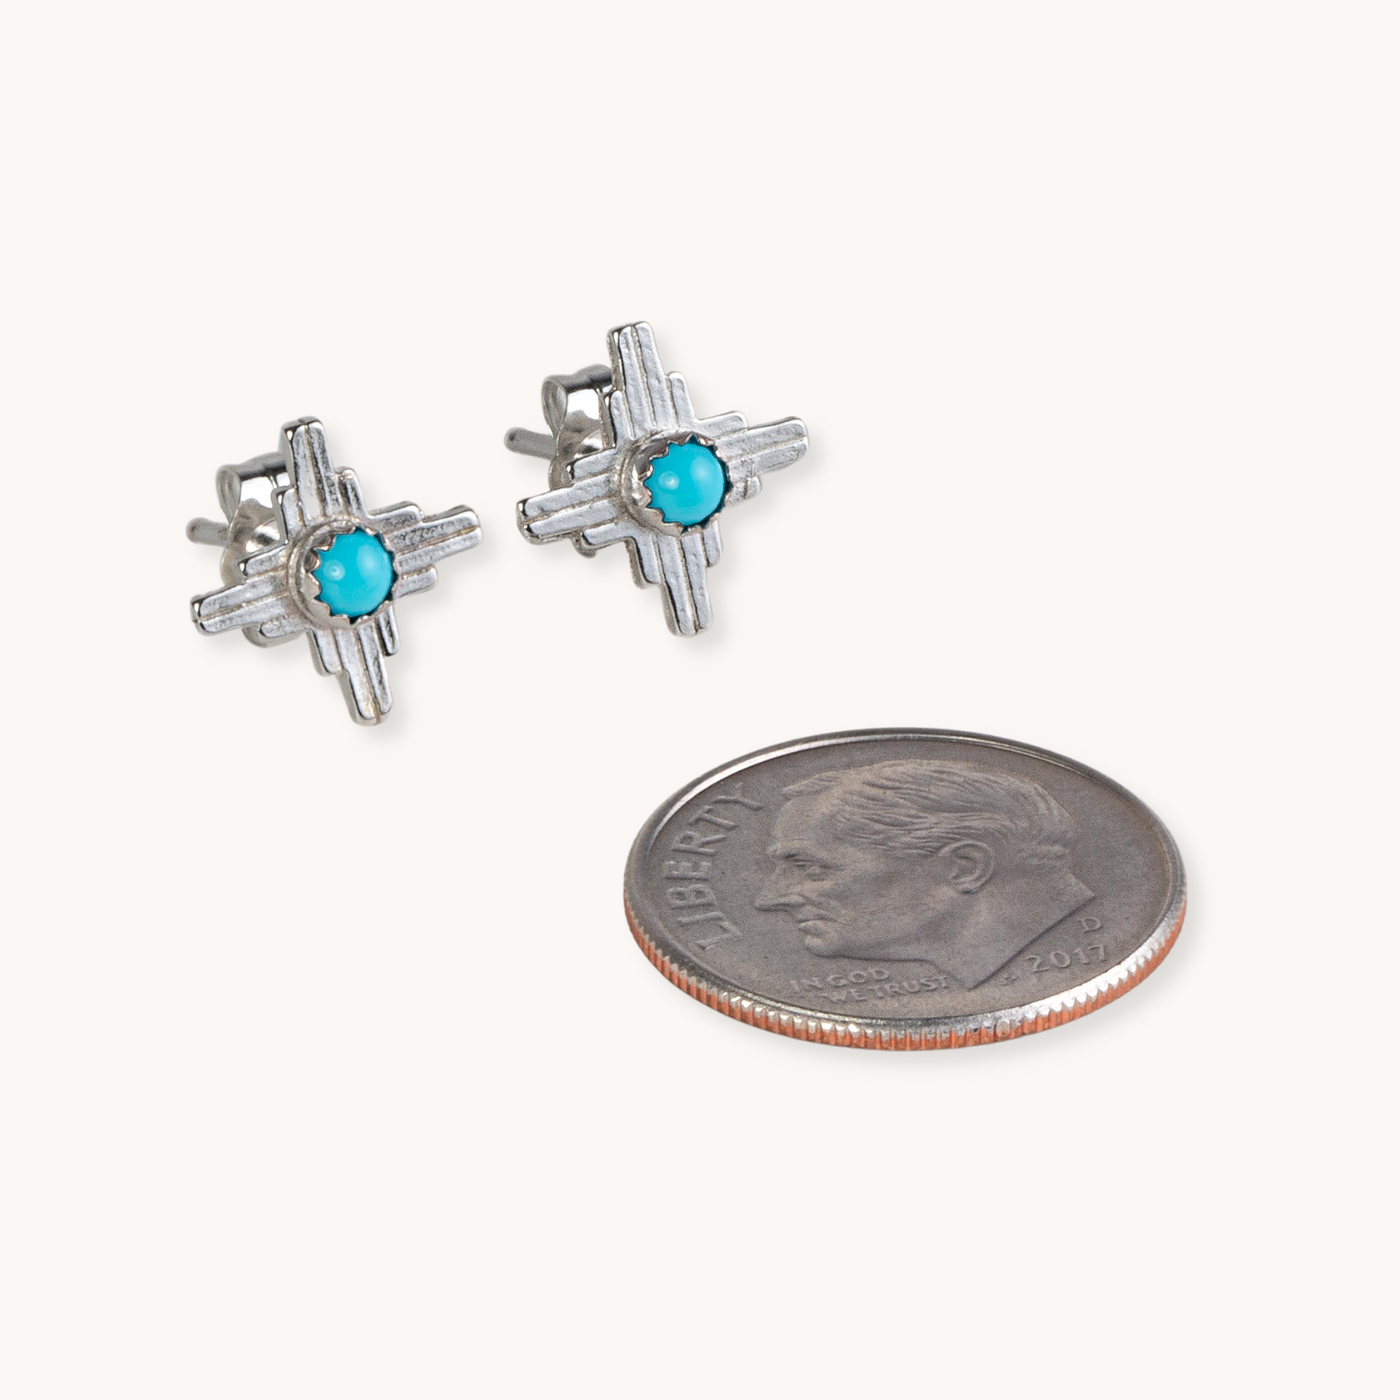 Turquoise Stone Silver Stud Earrings